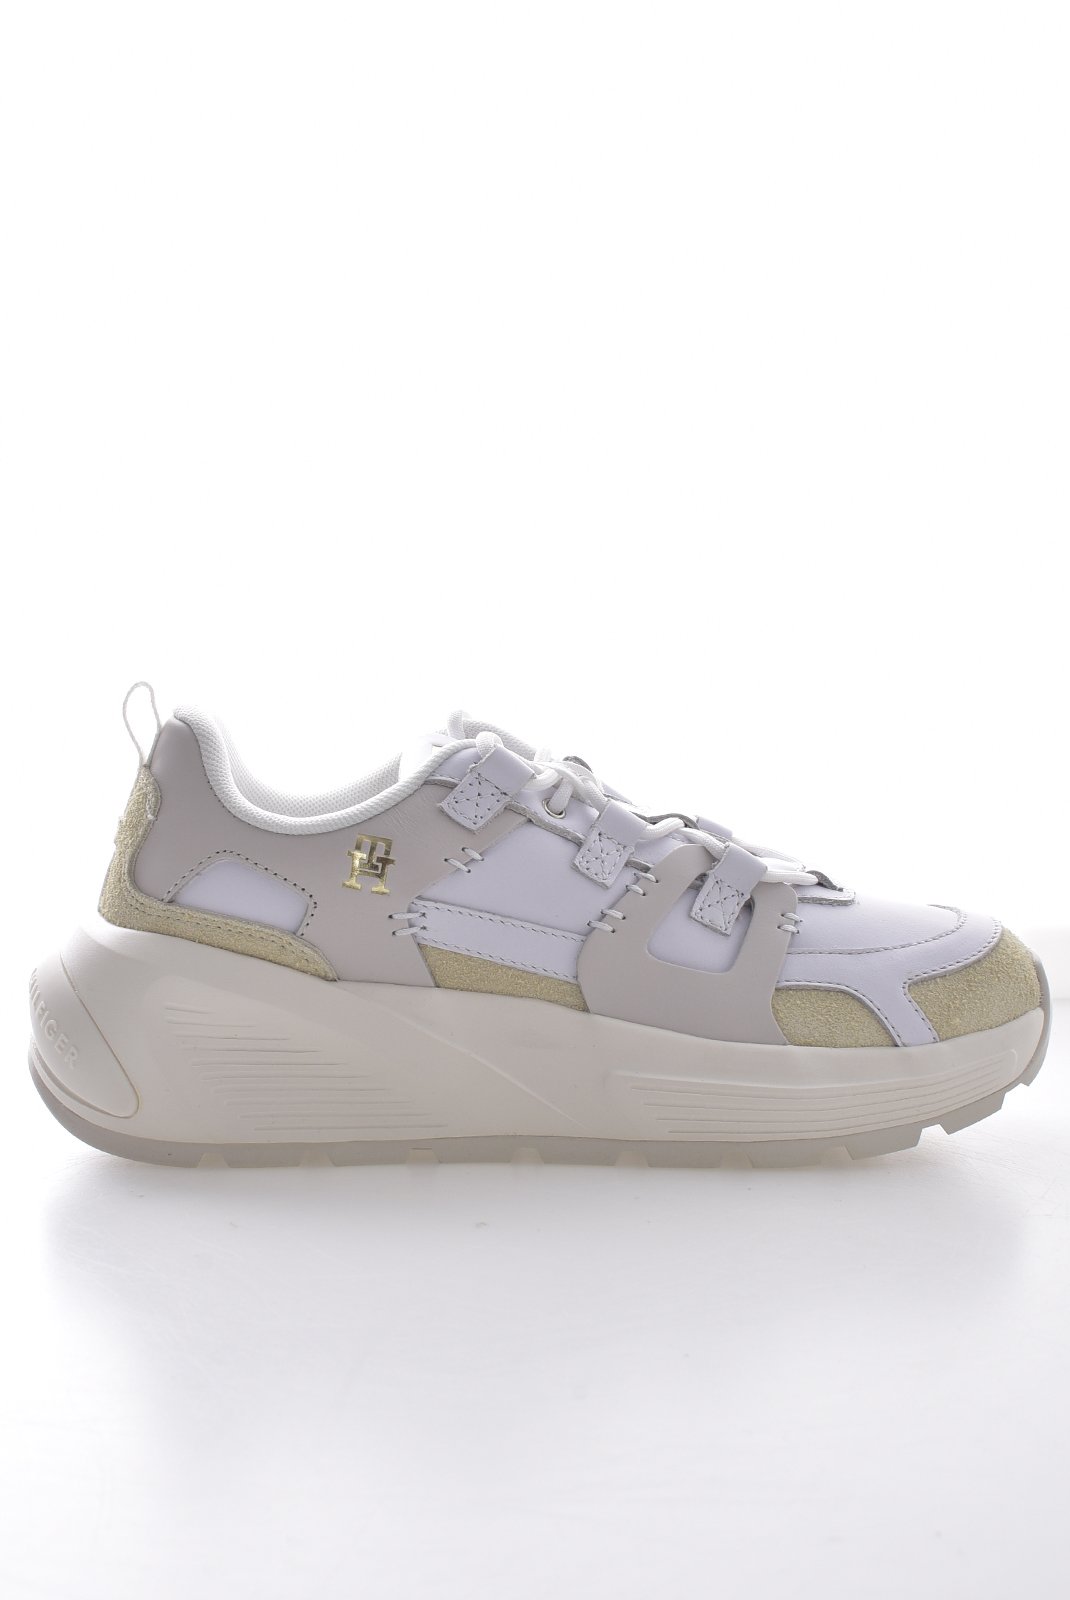 Baskets / Sneakers  Tommy Hilfiger FW0FW07709 YBS White